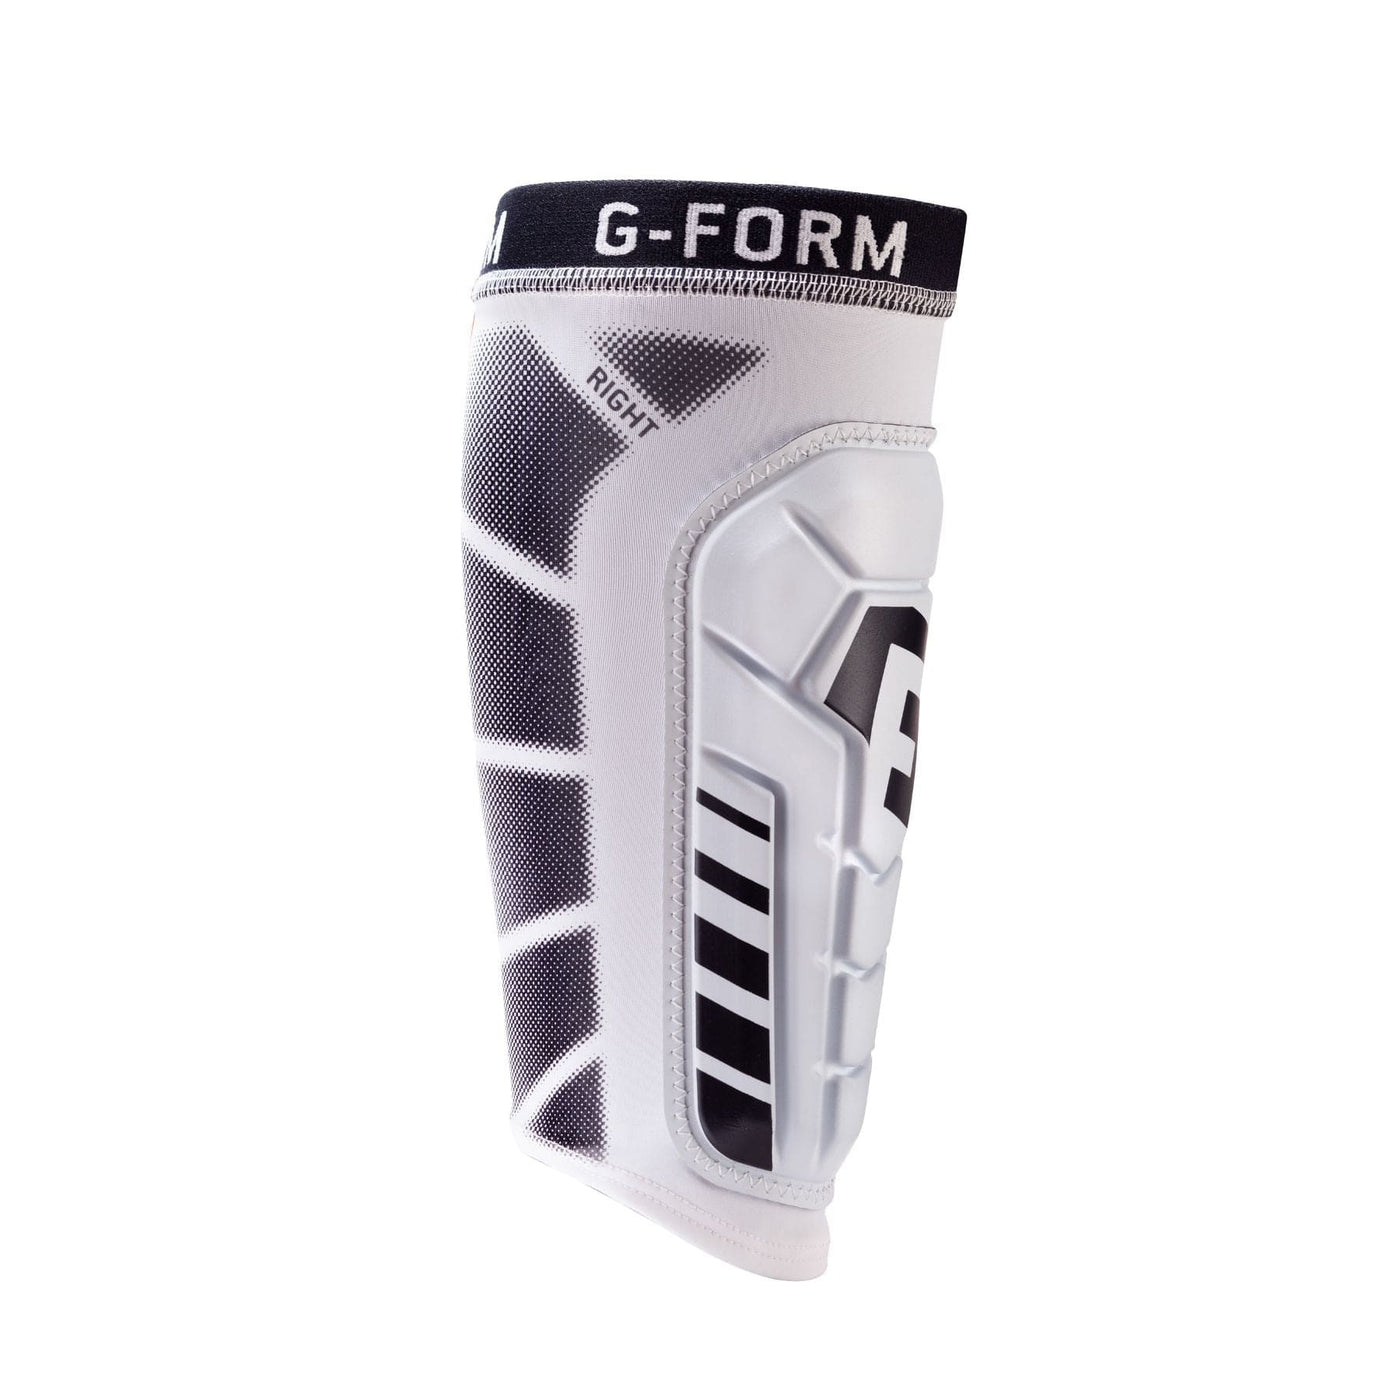 G-Form Shin Guards for Football Pro-S Vento - White 8Lines Shop - Fast Shipping